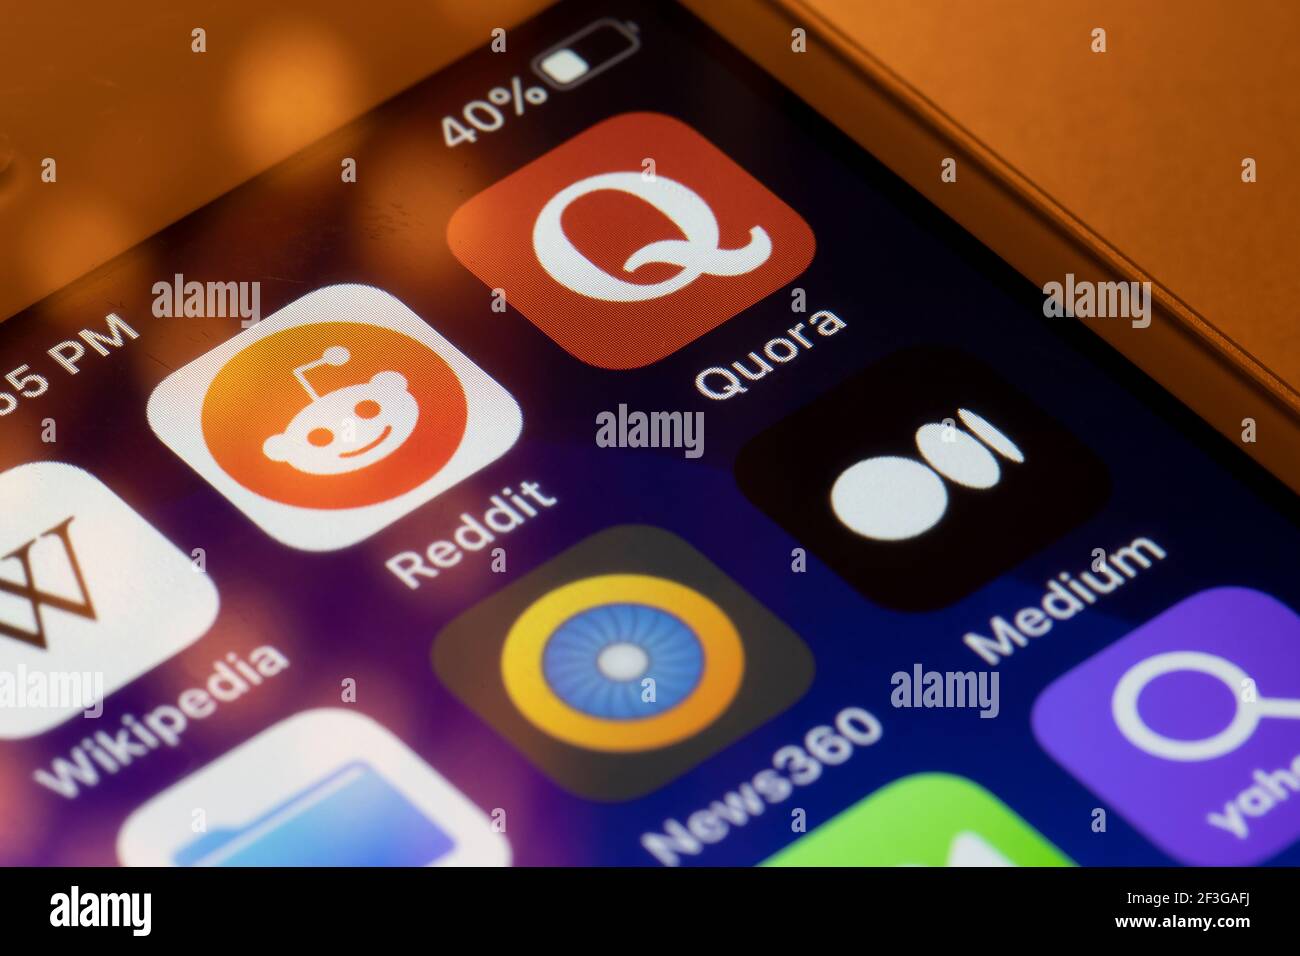 Quora, the popular question-and-answer app, is seen on an iPhone with Reddit, Medium, and News360 apps, which are considered as Quora alternatives. Stock Photo